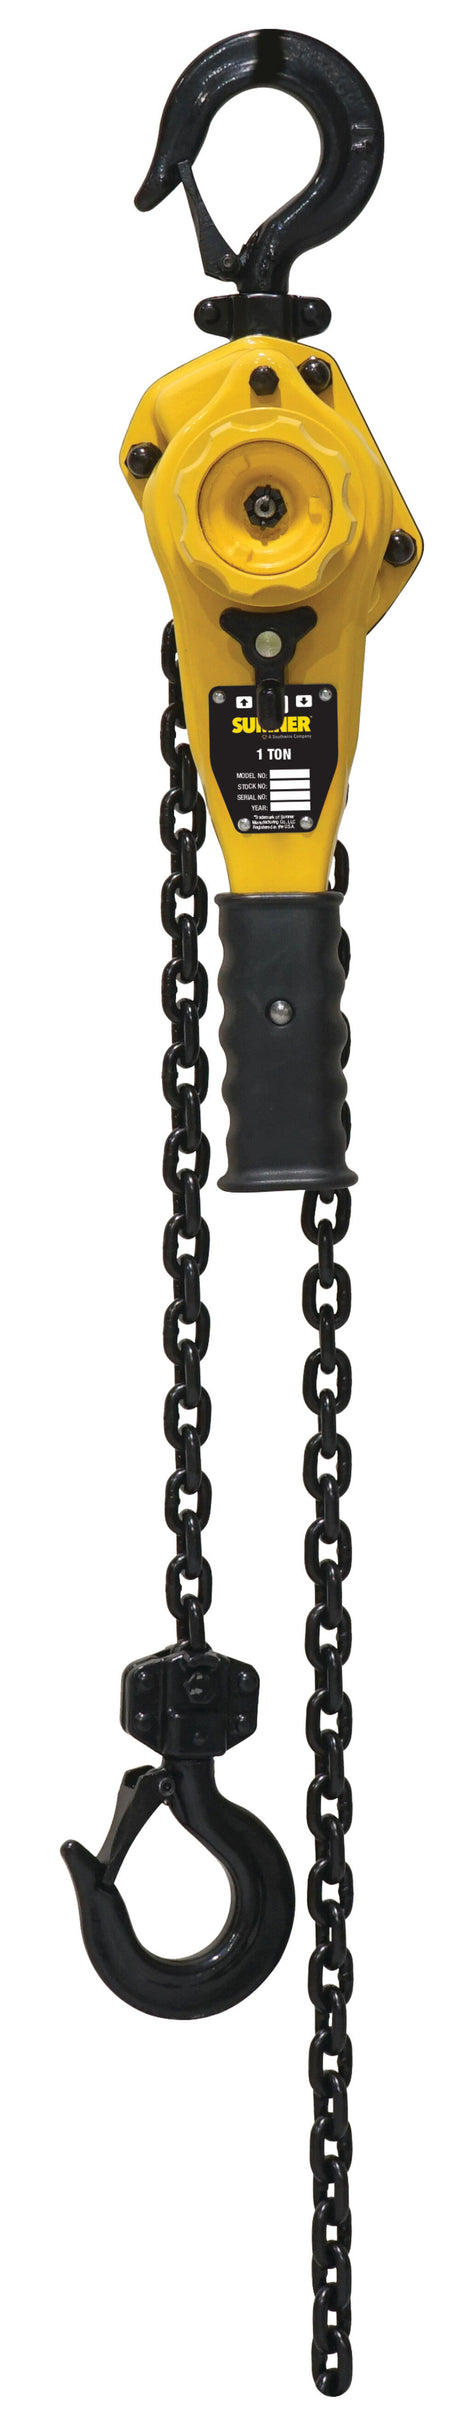 1 Ton Lever Hoist with 10 ft. Chain Fall 787485